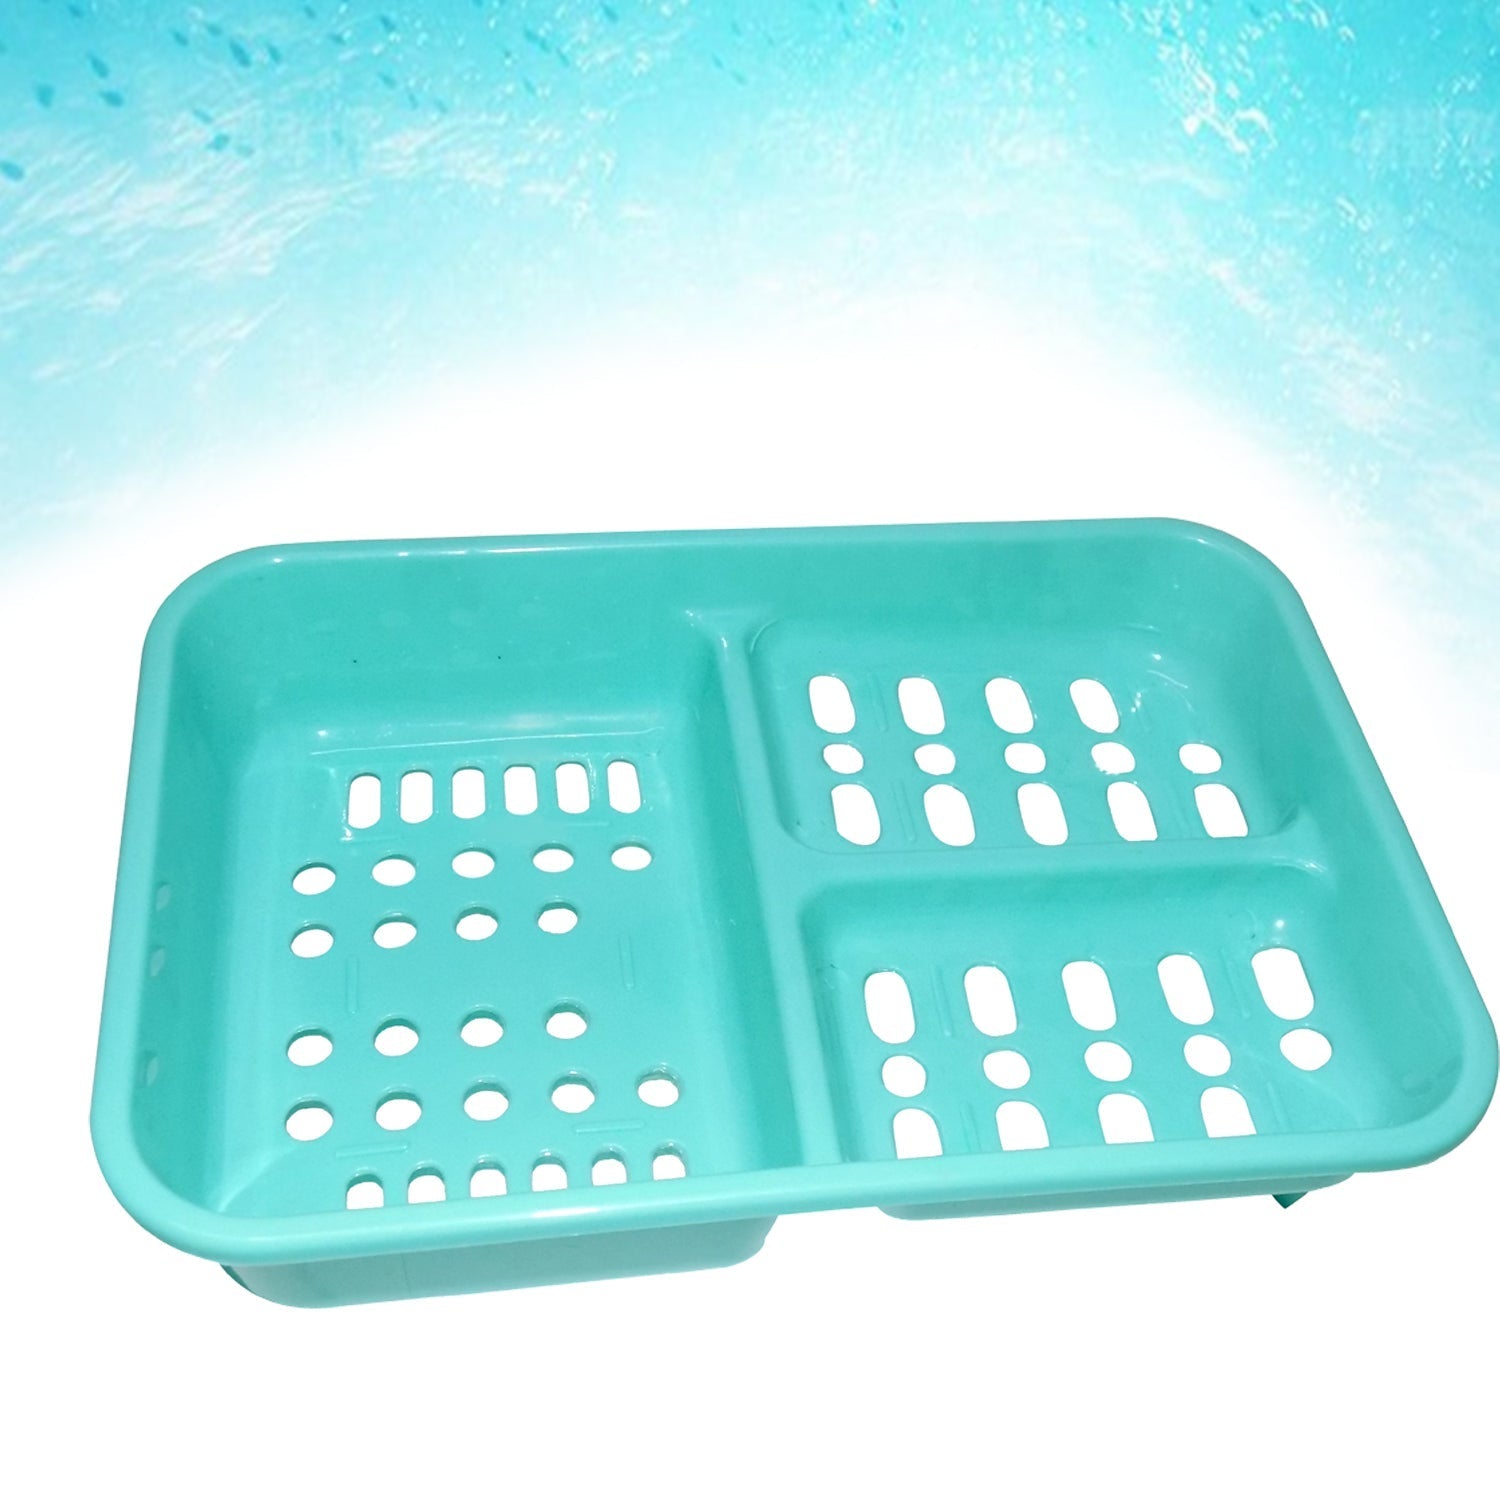 3-in-1 Soap keeping Plastic Case for Bathroom use